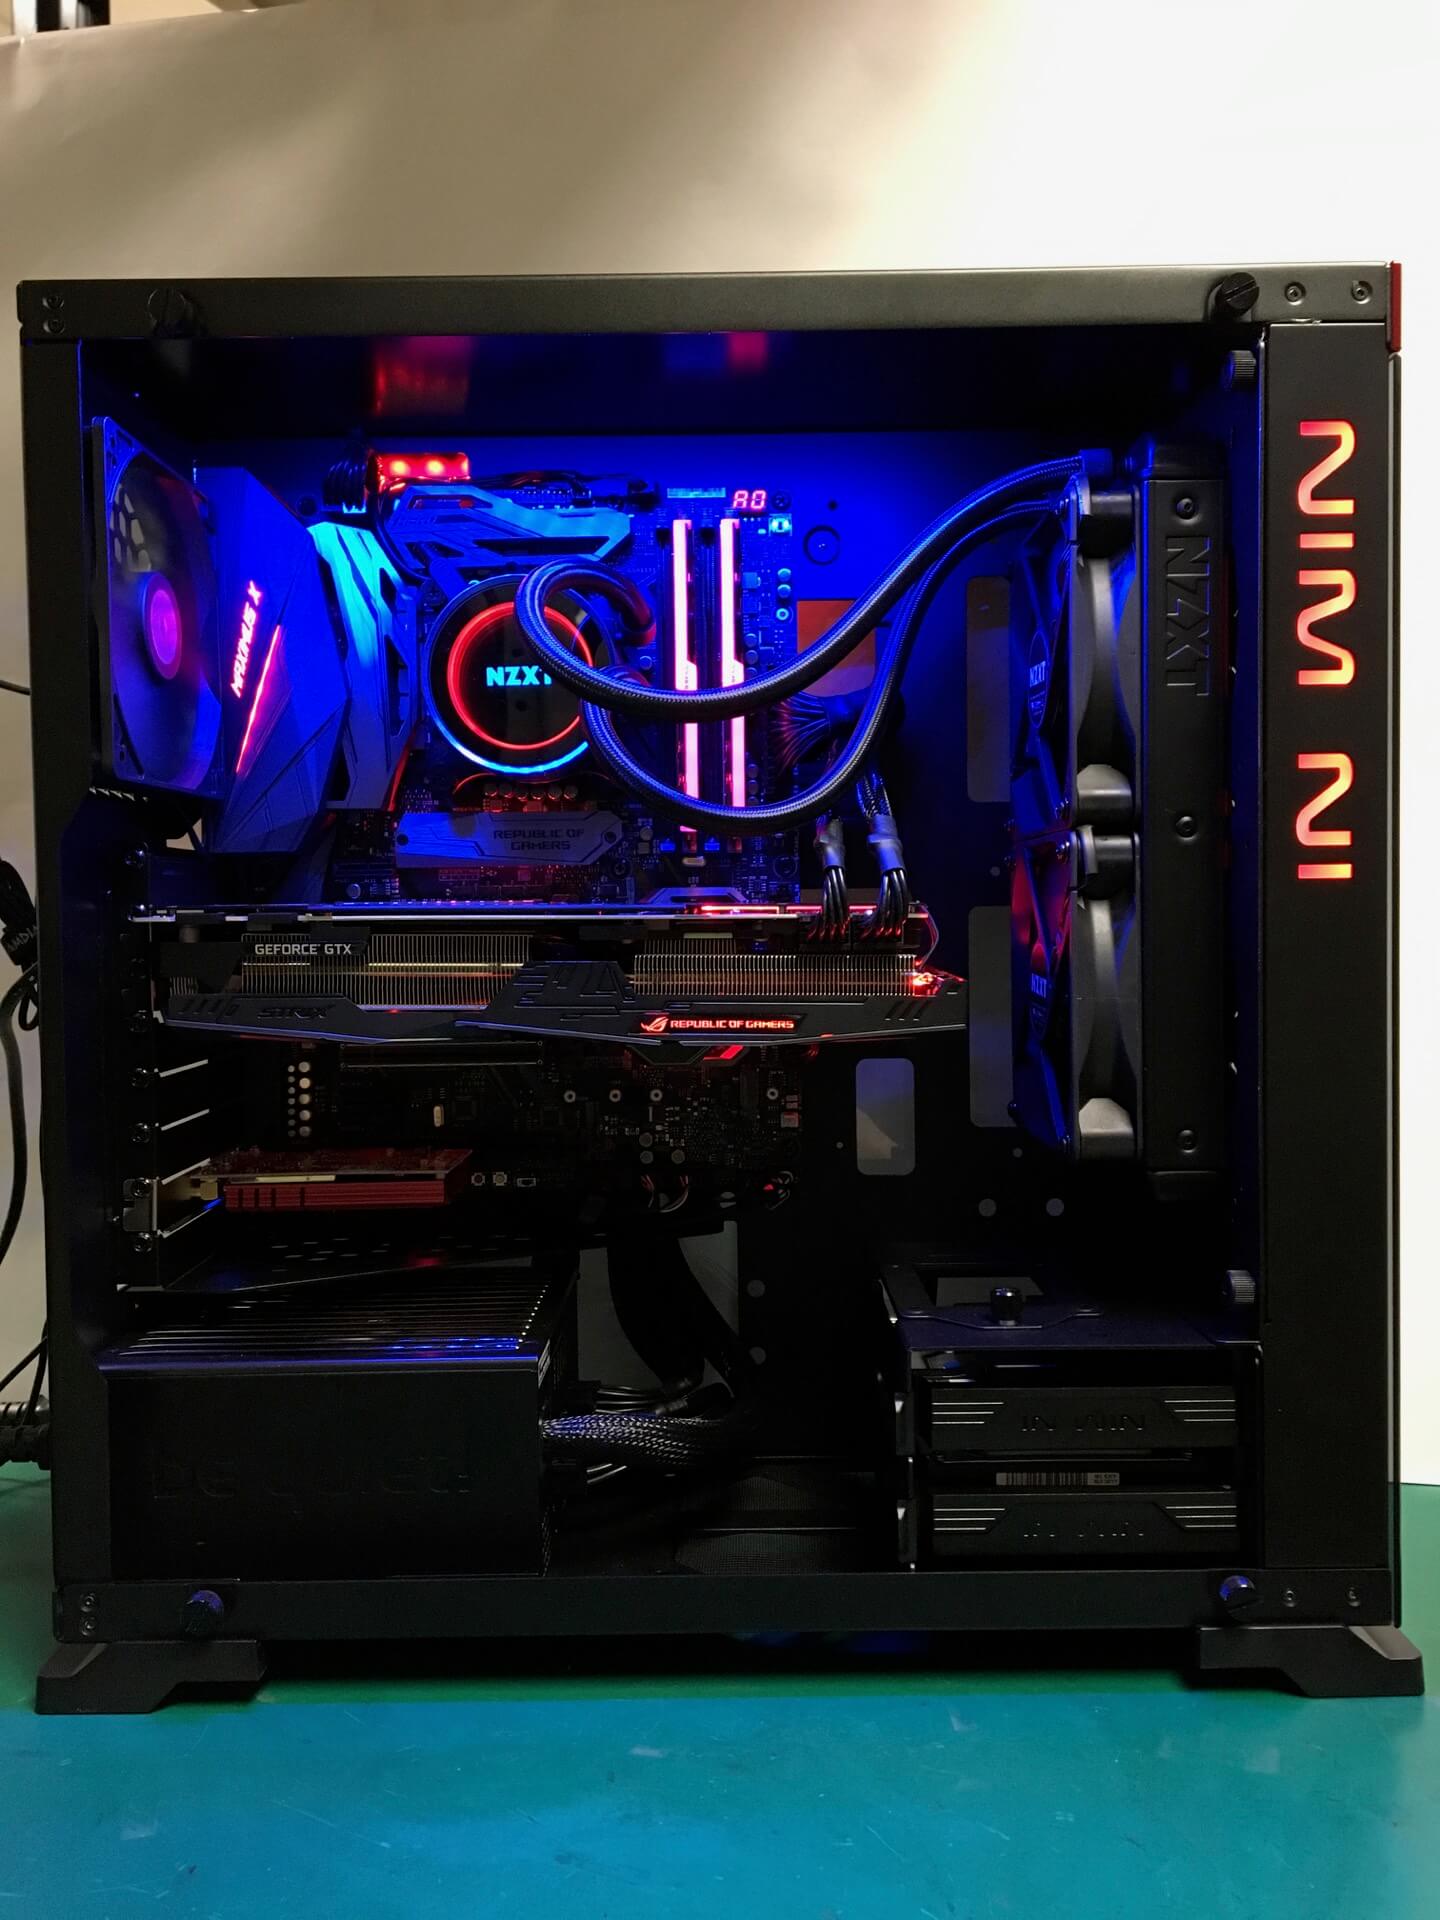 Image #21 In Win 805 Infinity Black Red Build